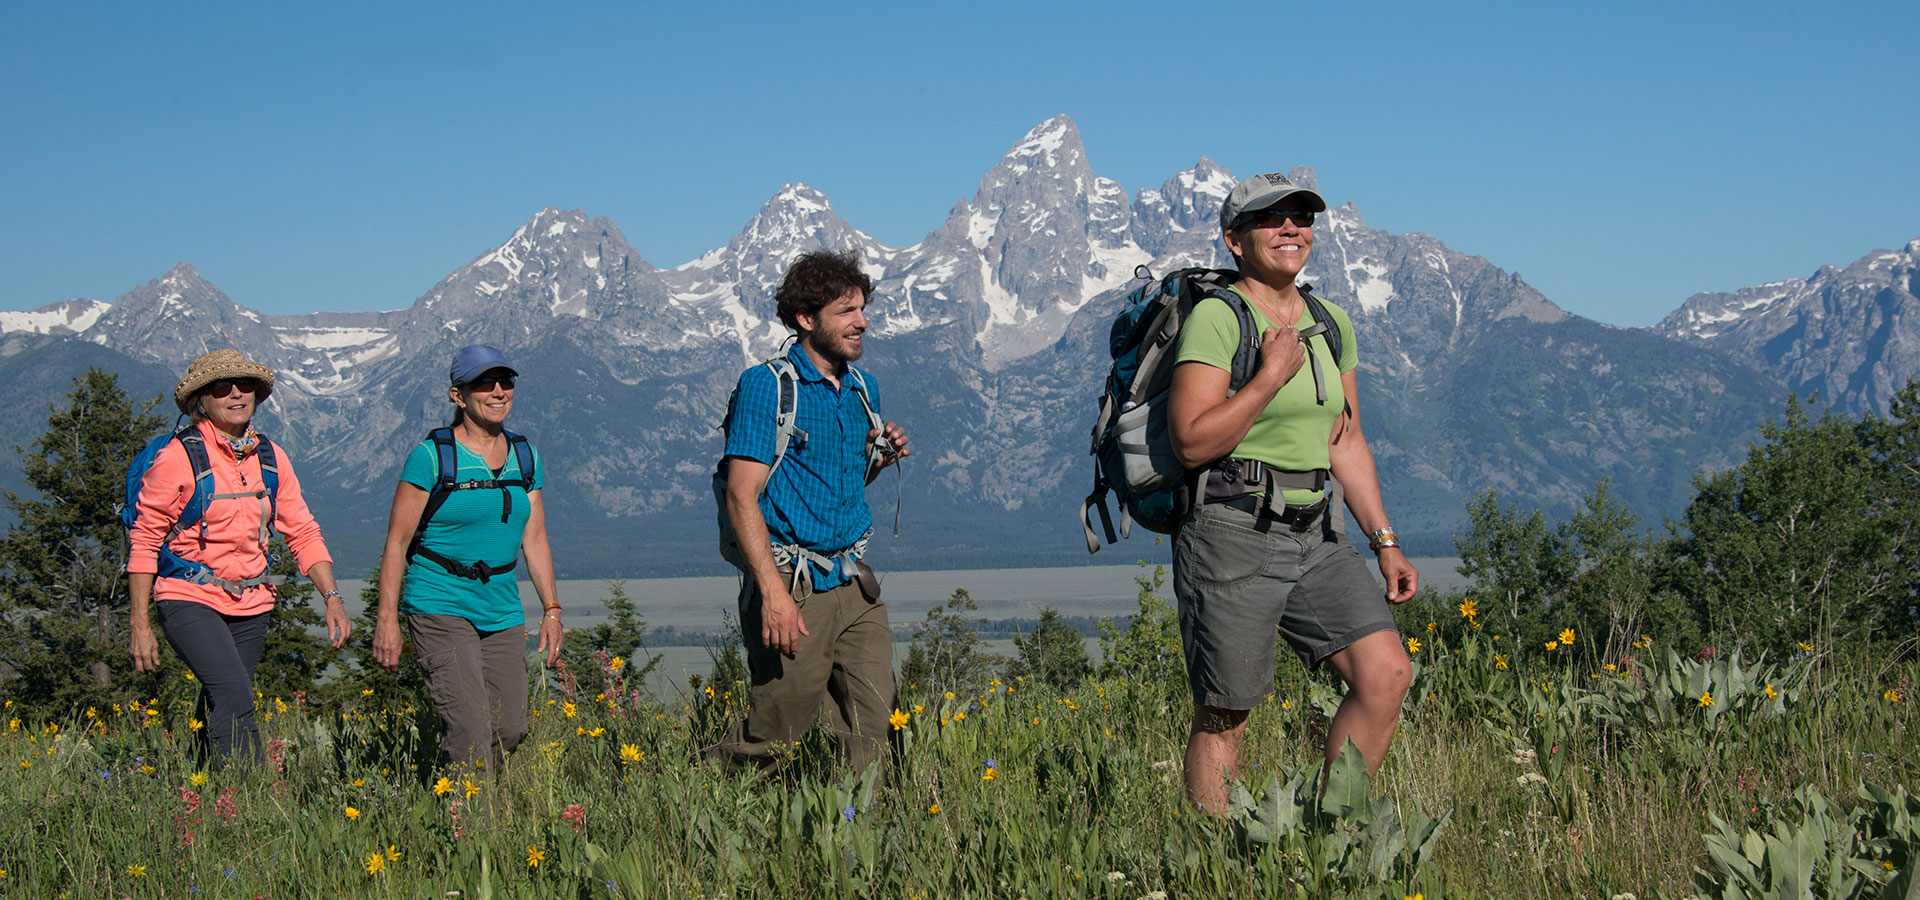 Enjoy hiking tours in Jackson Hole and Grand Teton National Park with the Hole Hiking Experience